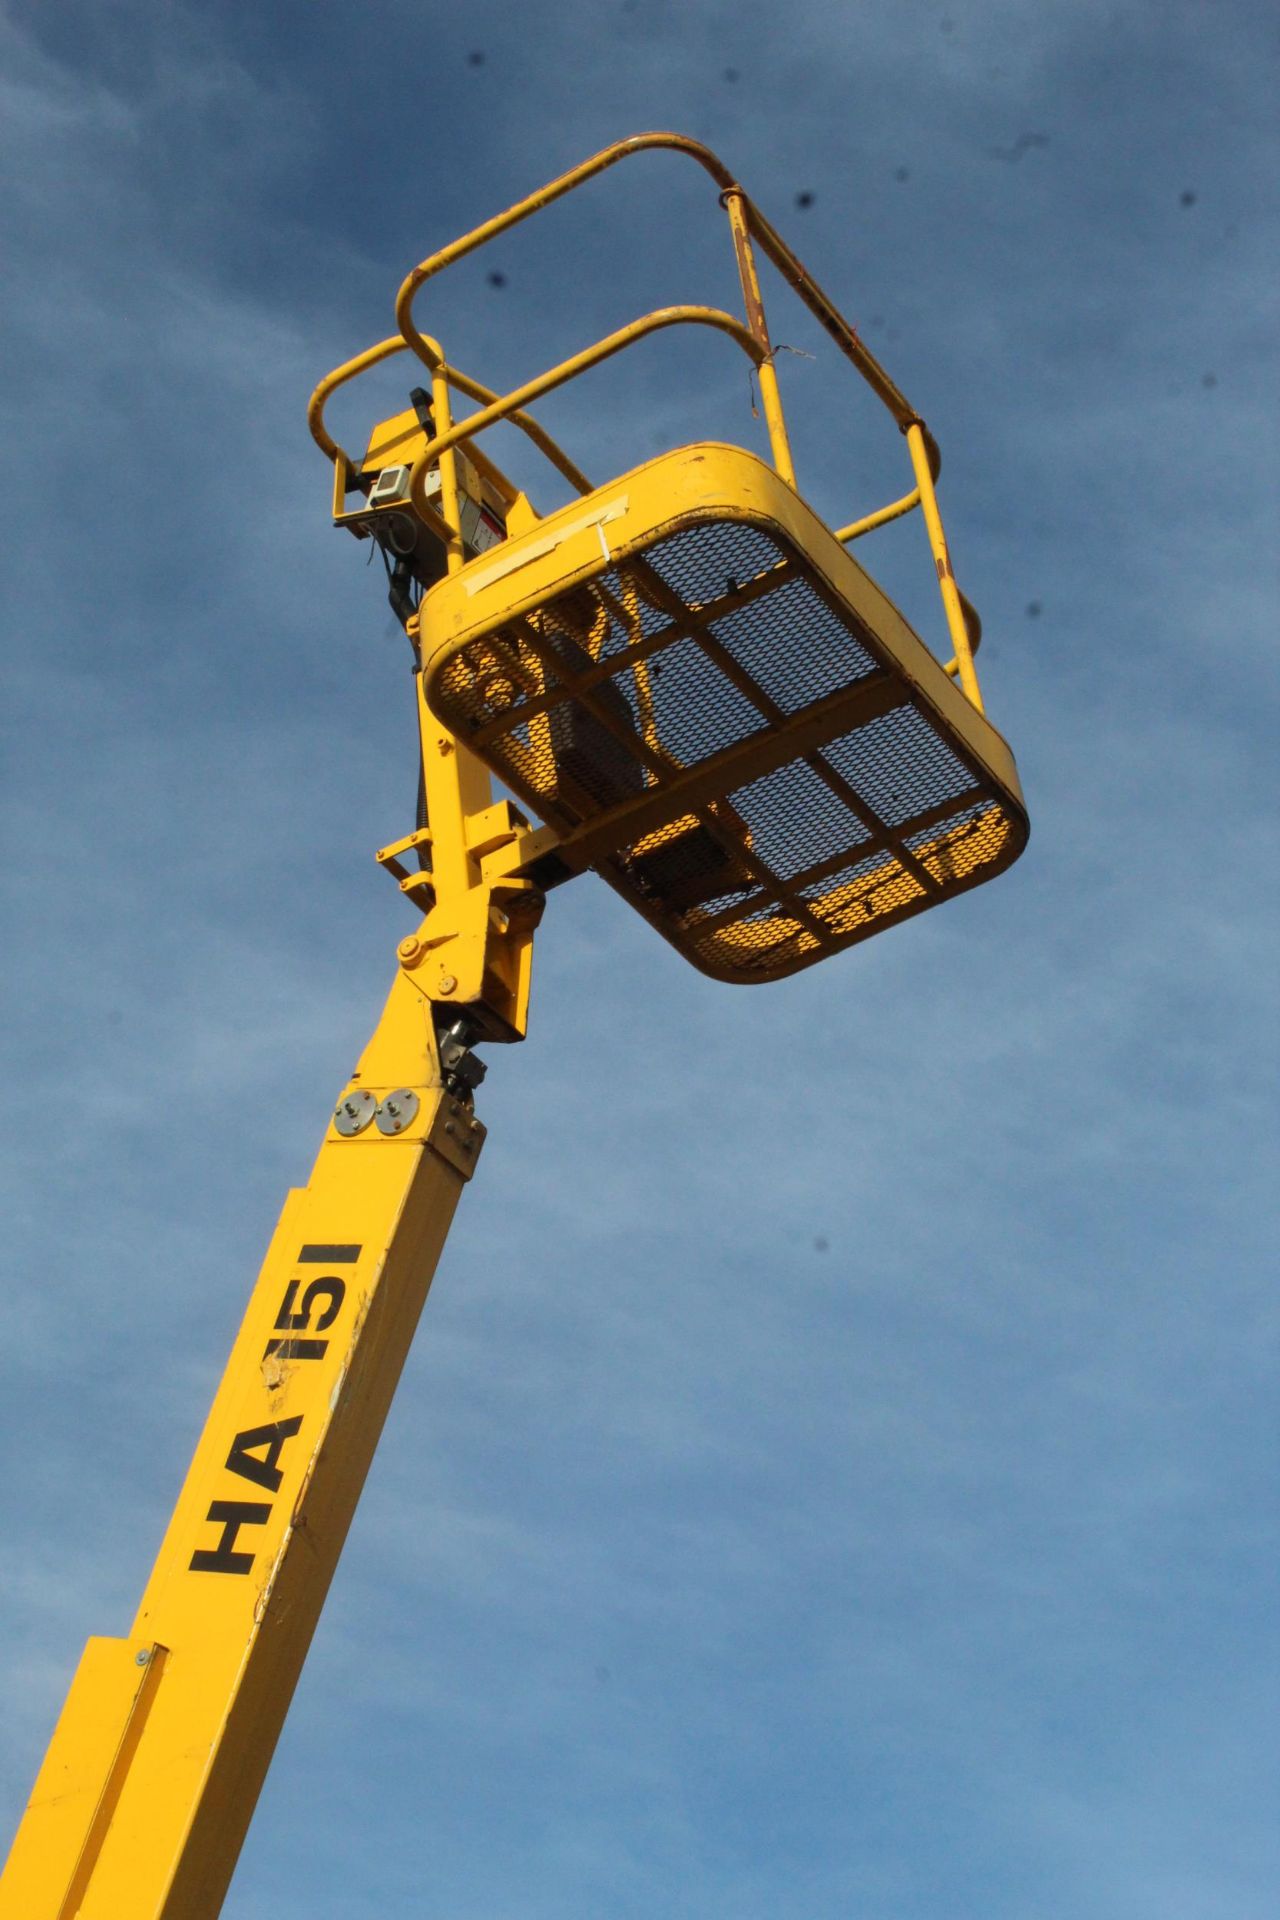 INDOOR HAULETTE HAISI 48V HA15 CHERRY PICKER APPROX 2000 HOURS BUILT IN 110/240V CHARGER 15 METRE - Image 3 of 10